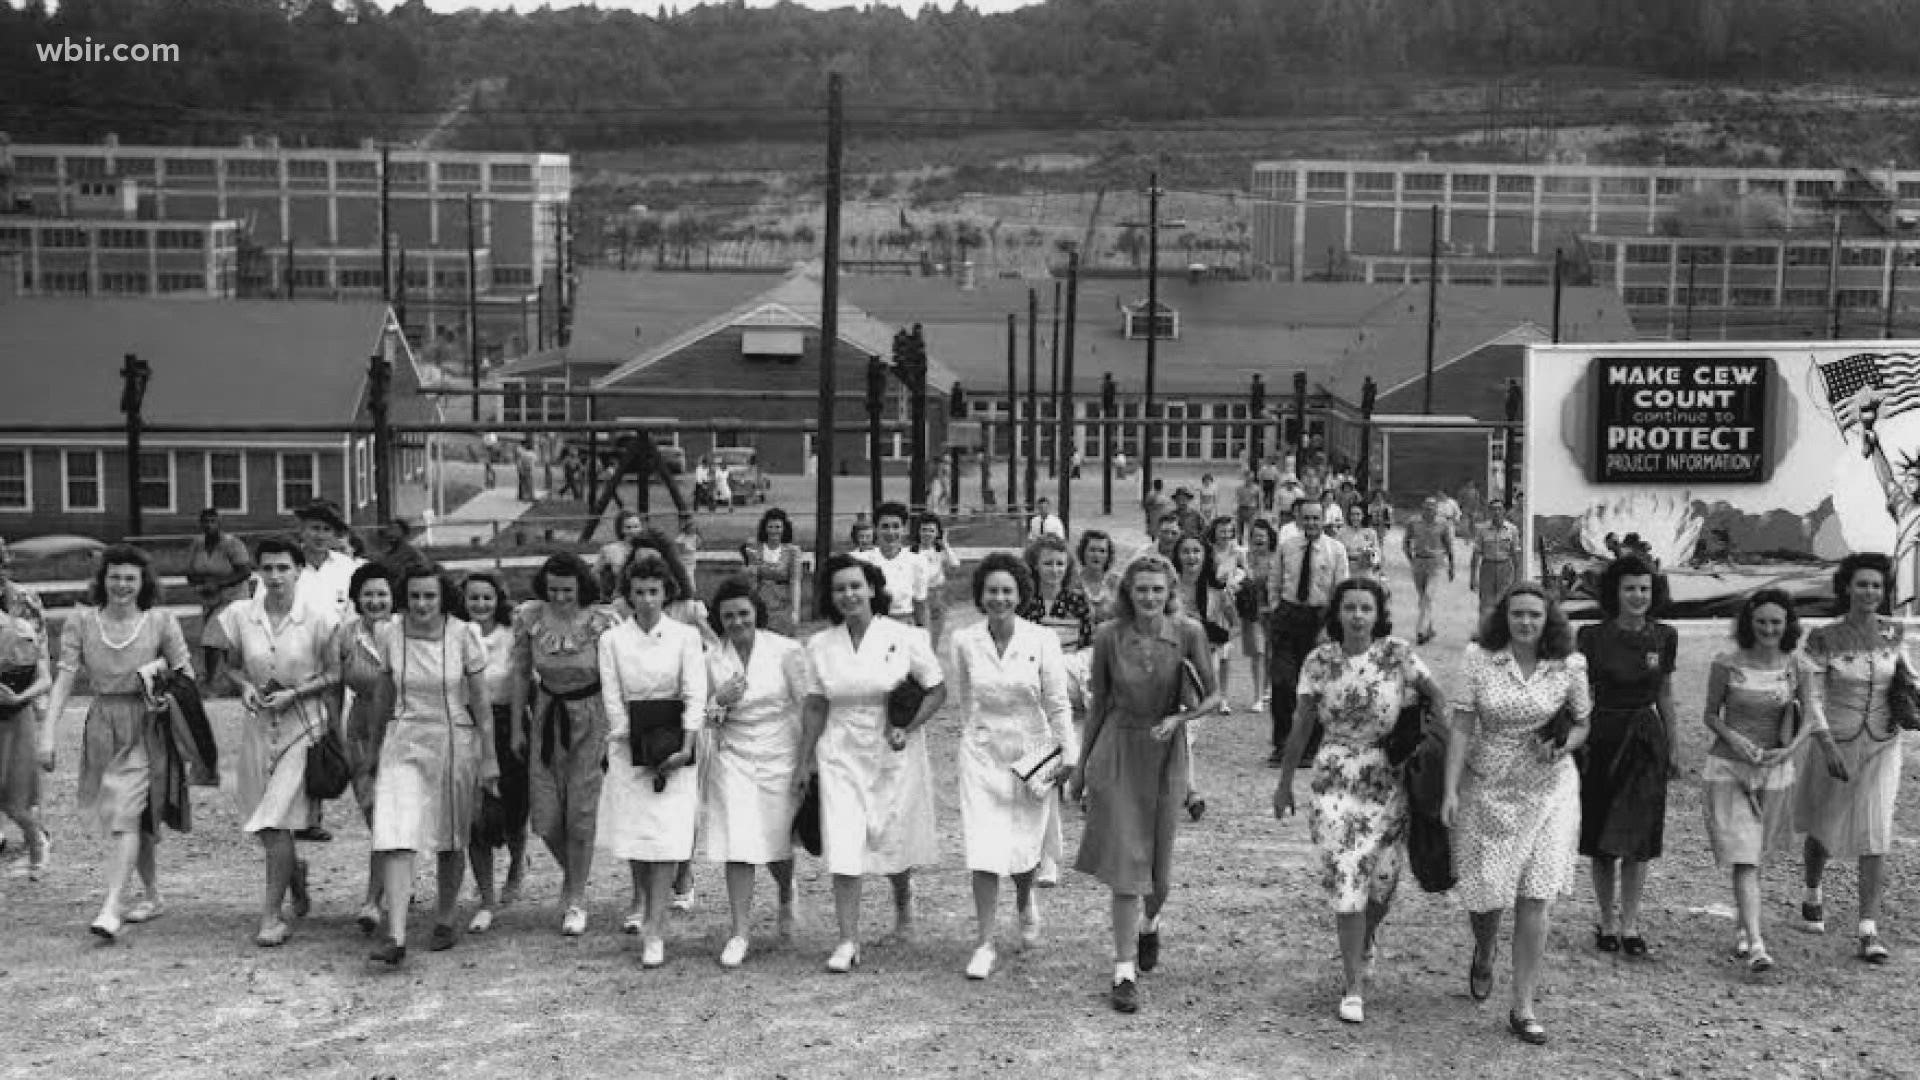 The Calutron Girls in Oak Ridge had no idea at the time what their job meant when they clocked in and out, but they contributed to history in a big way.